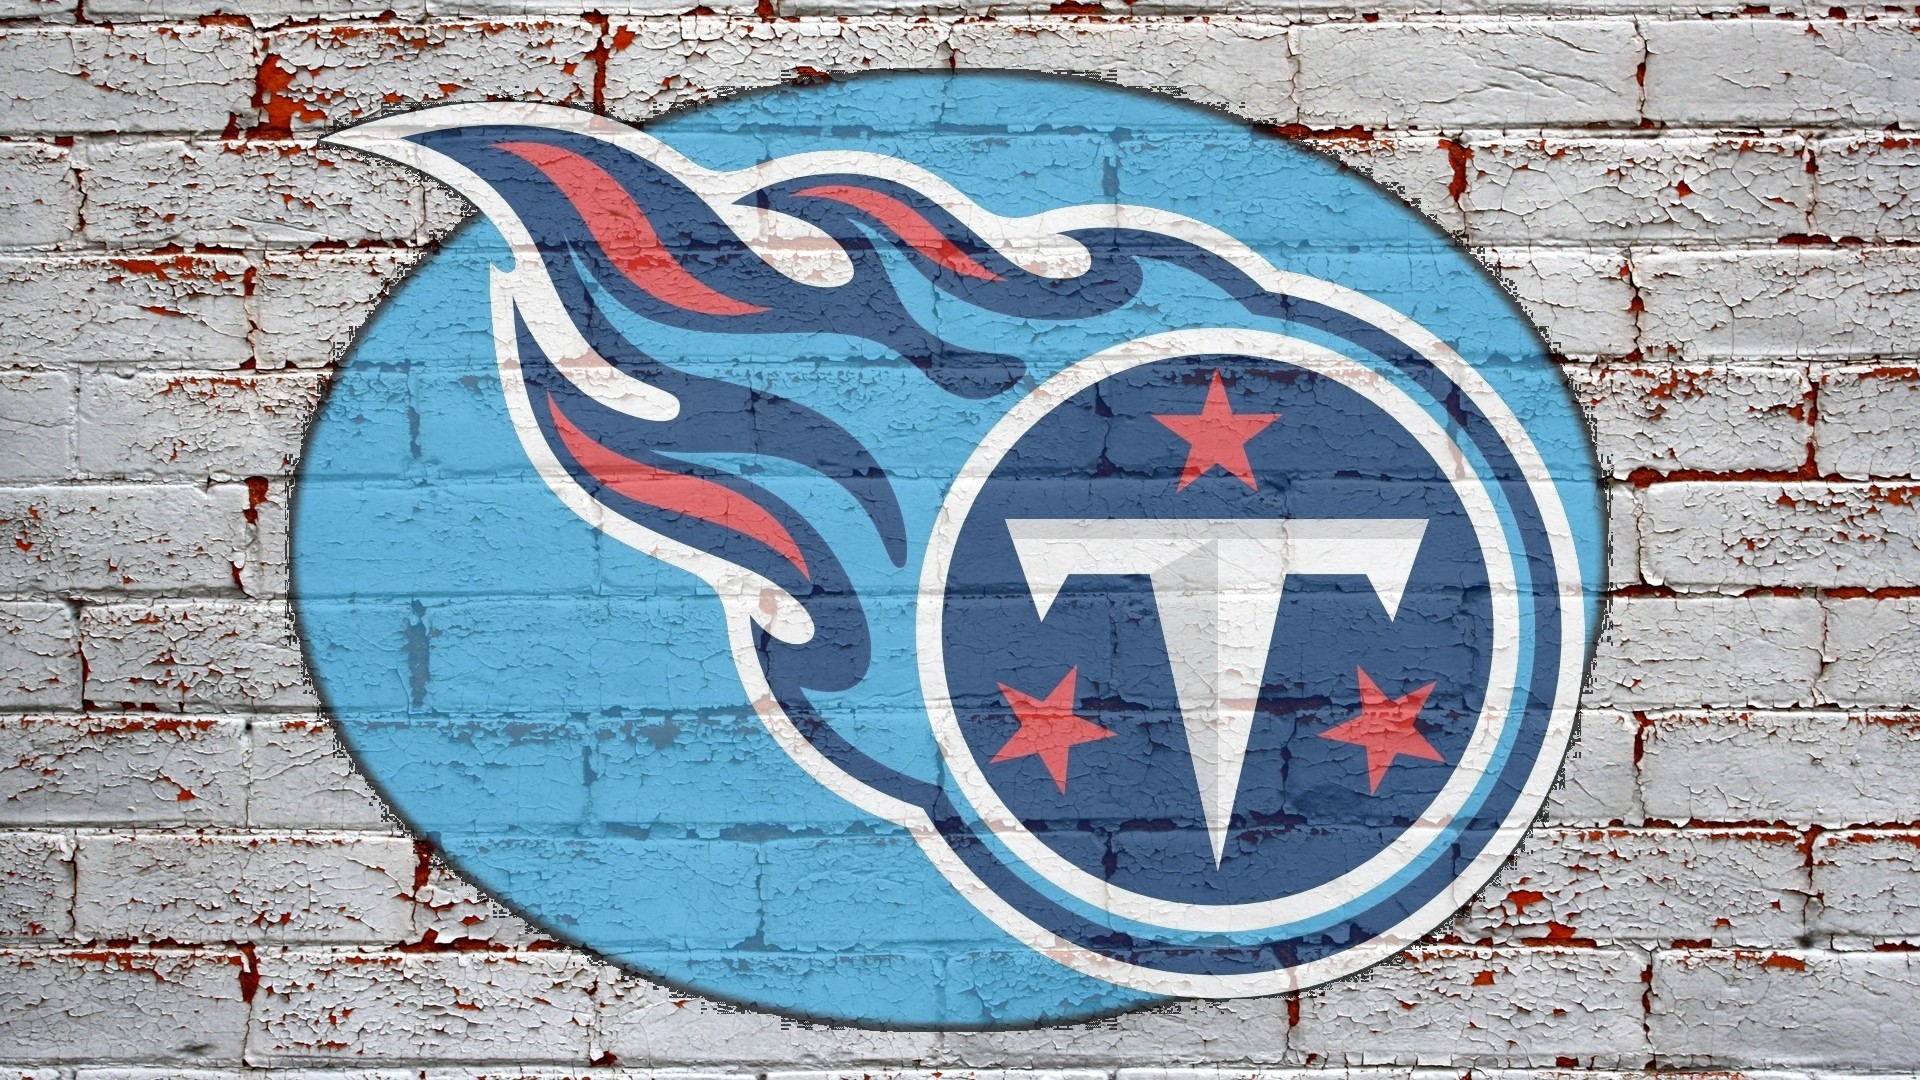 PC Wallpaper Tennessee Titans With high-resolution 1920X1080 pixel. Download and set as wallpaper for Desktop Computer, Apple iPhone X, XS Max, XR, 8, 7, 6, SE, iPad, Android